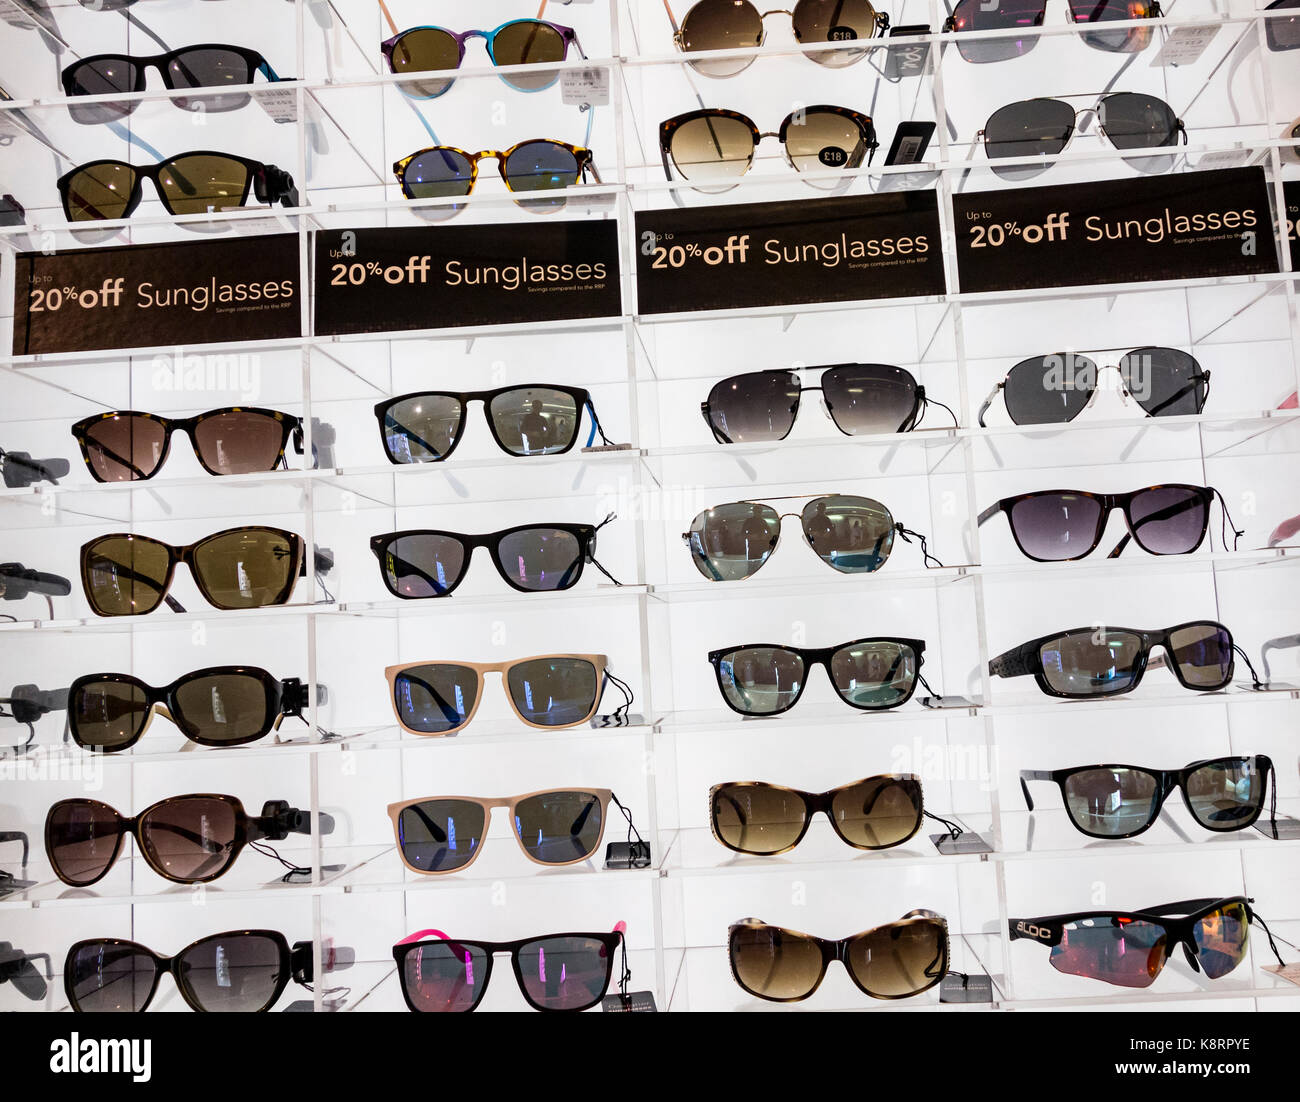 Sunglasses in airport duty free shop 